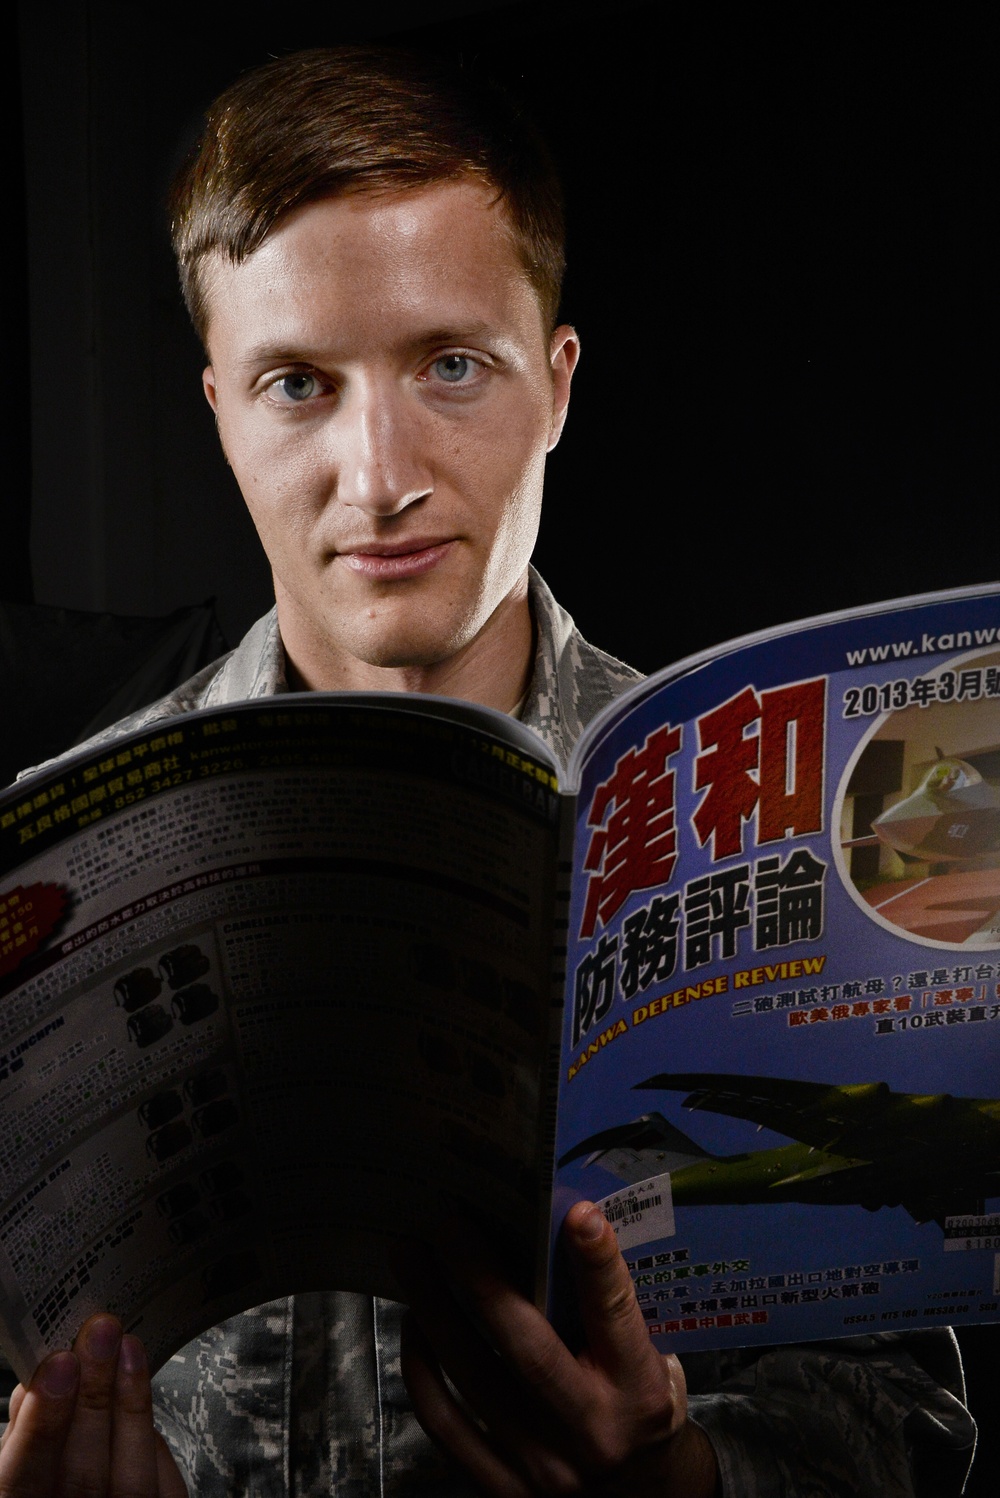 Airman enjoys being student, mastering Chinese culture, language